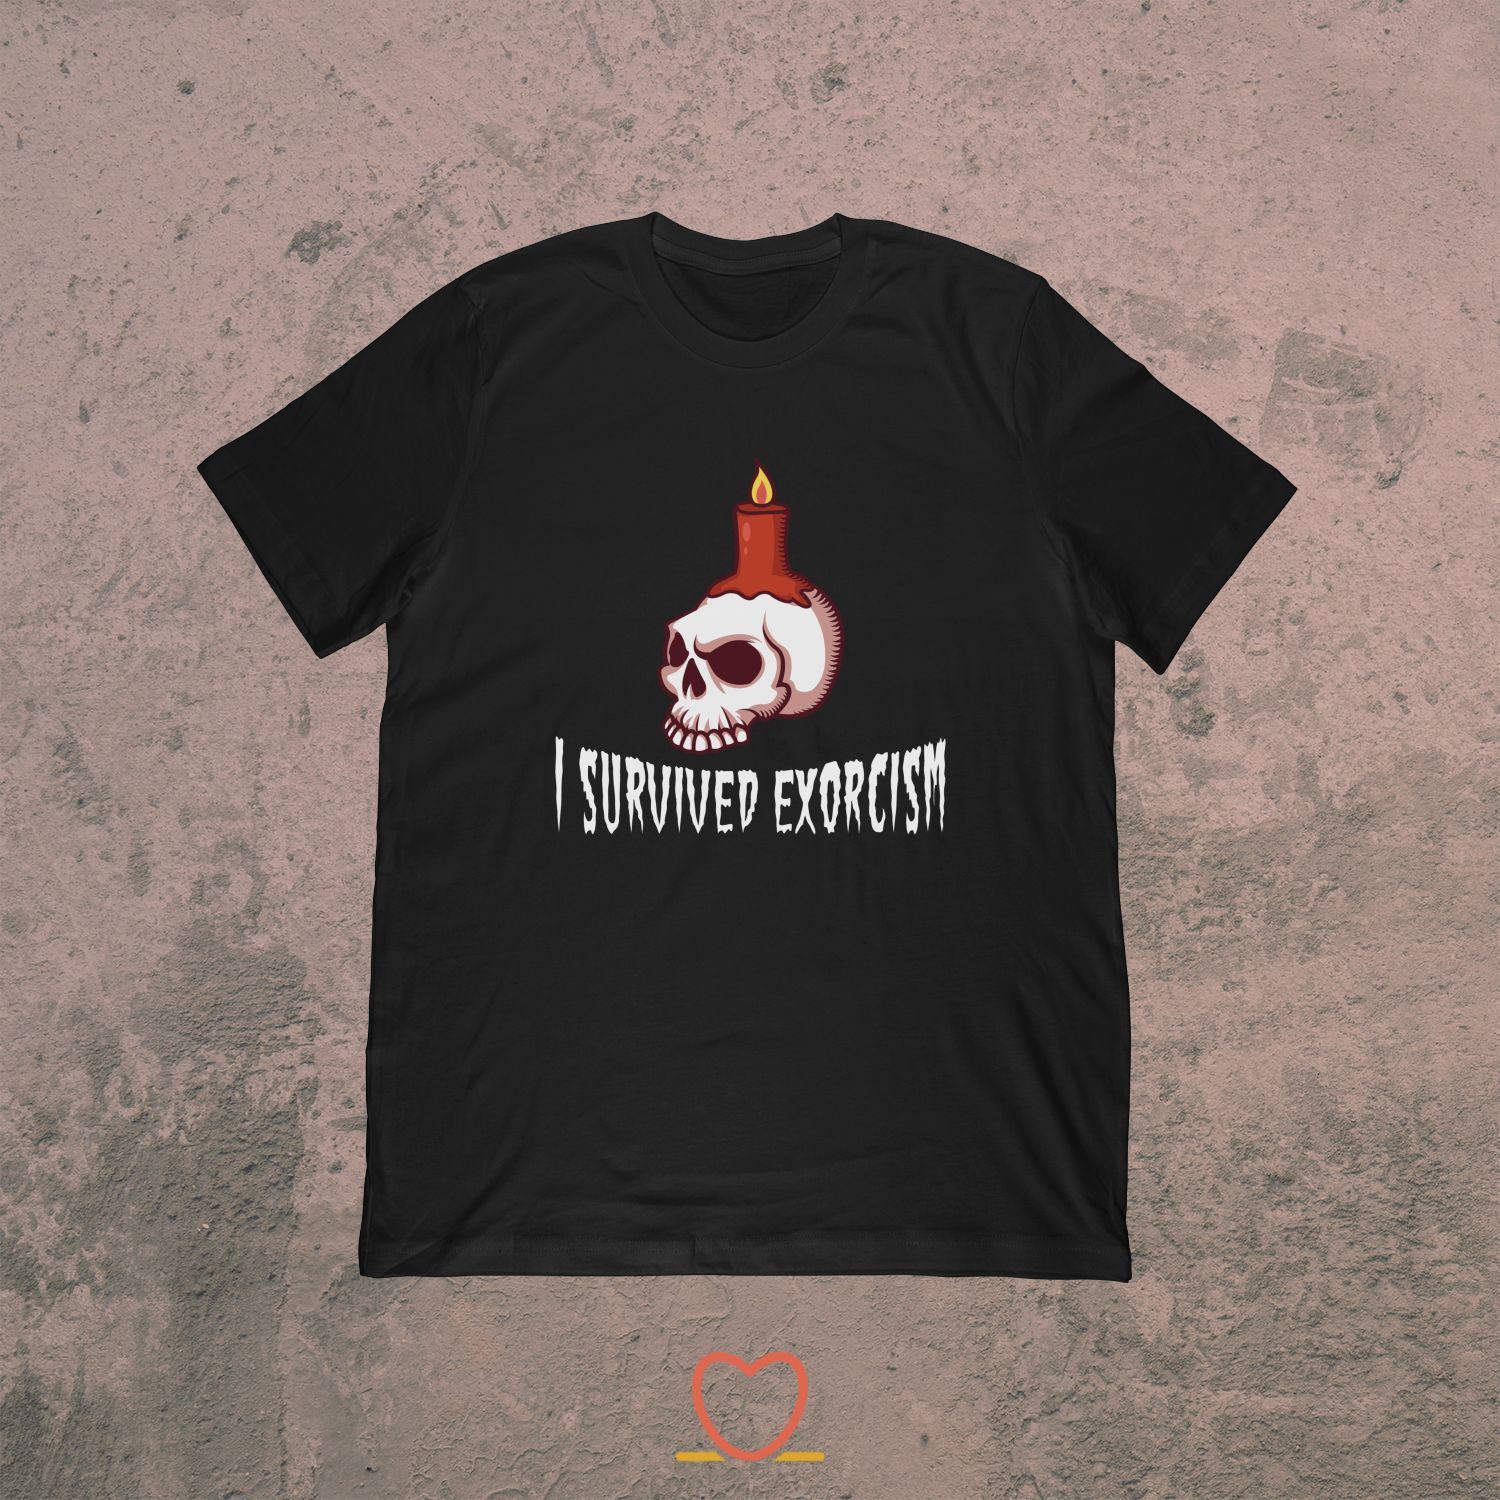 Funny Frightening Movie – I Survived Exorcism Tee